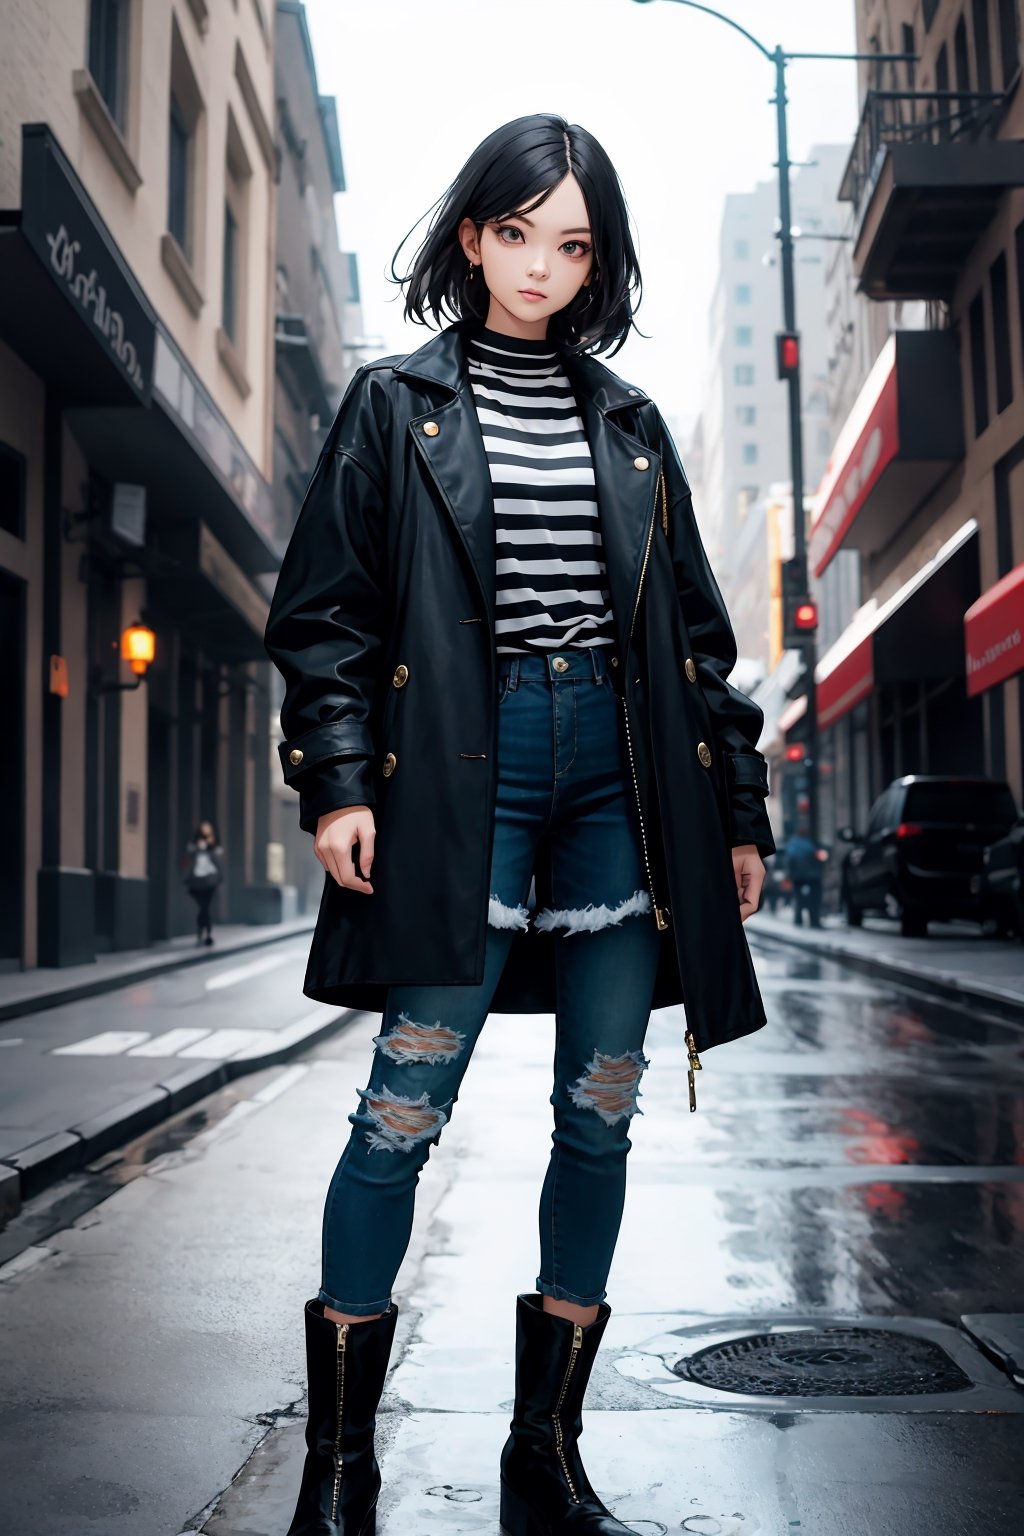 masterpiece, ultra high res, absurdres, (photo realistic),
A young female fashion model, armond eyes, BREAK,
gradient hair, Loose Topsy-Tail,BREAK,
(early spring fashion:1.2),
She looks cool and urban in her grey coat, striped shirt, black jeans, and lug sole boots. Her coat has some distressed details and an oversized fit that give it an edgy vibe. Her shirt is blue and white striped, adding some freshness to her look. Her boots are combat-style and add some contrast to her outfit. She is ready to hit the streets with confidence.
(dynamic pose:0.7),
simple background,dutch angle,